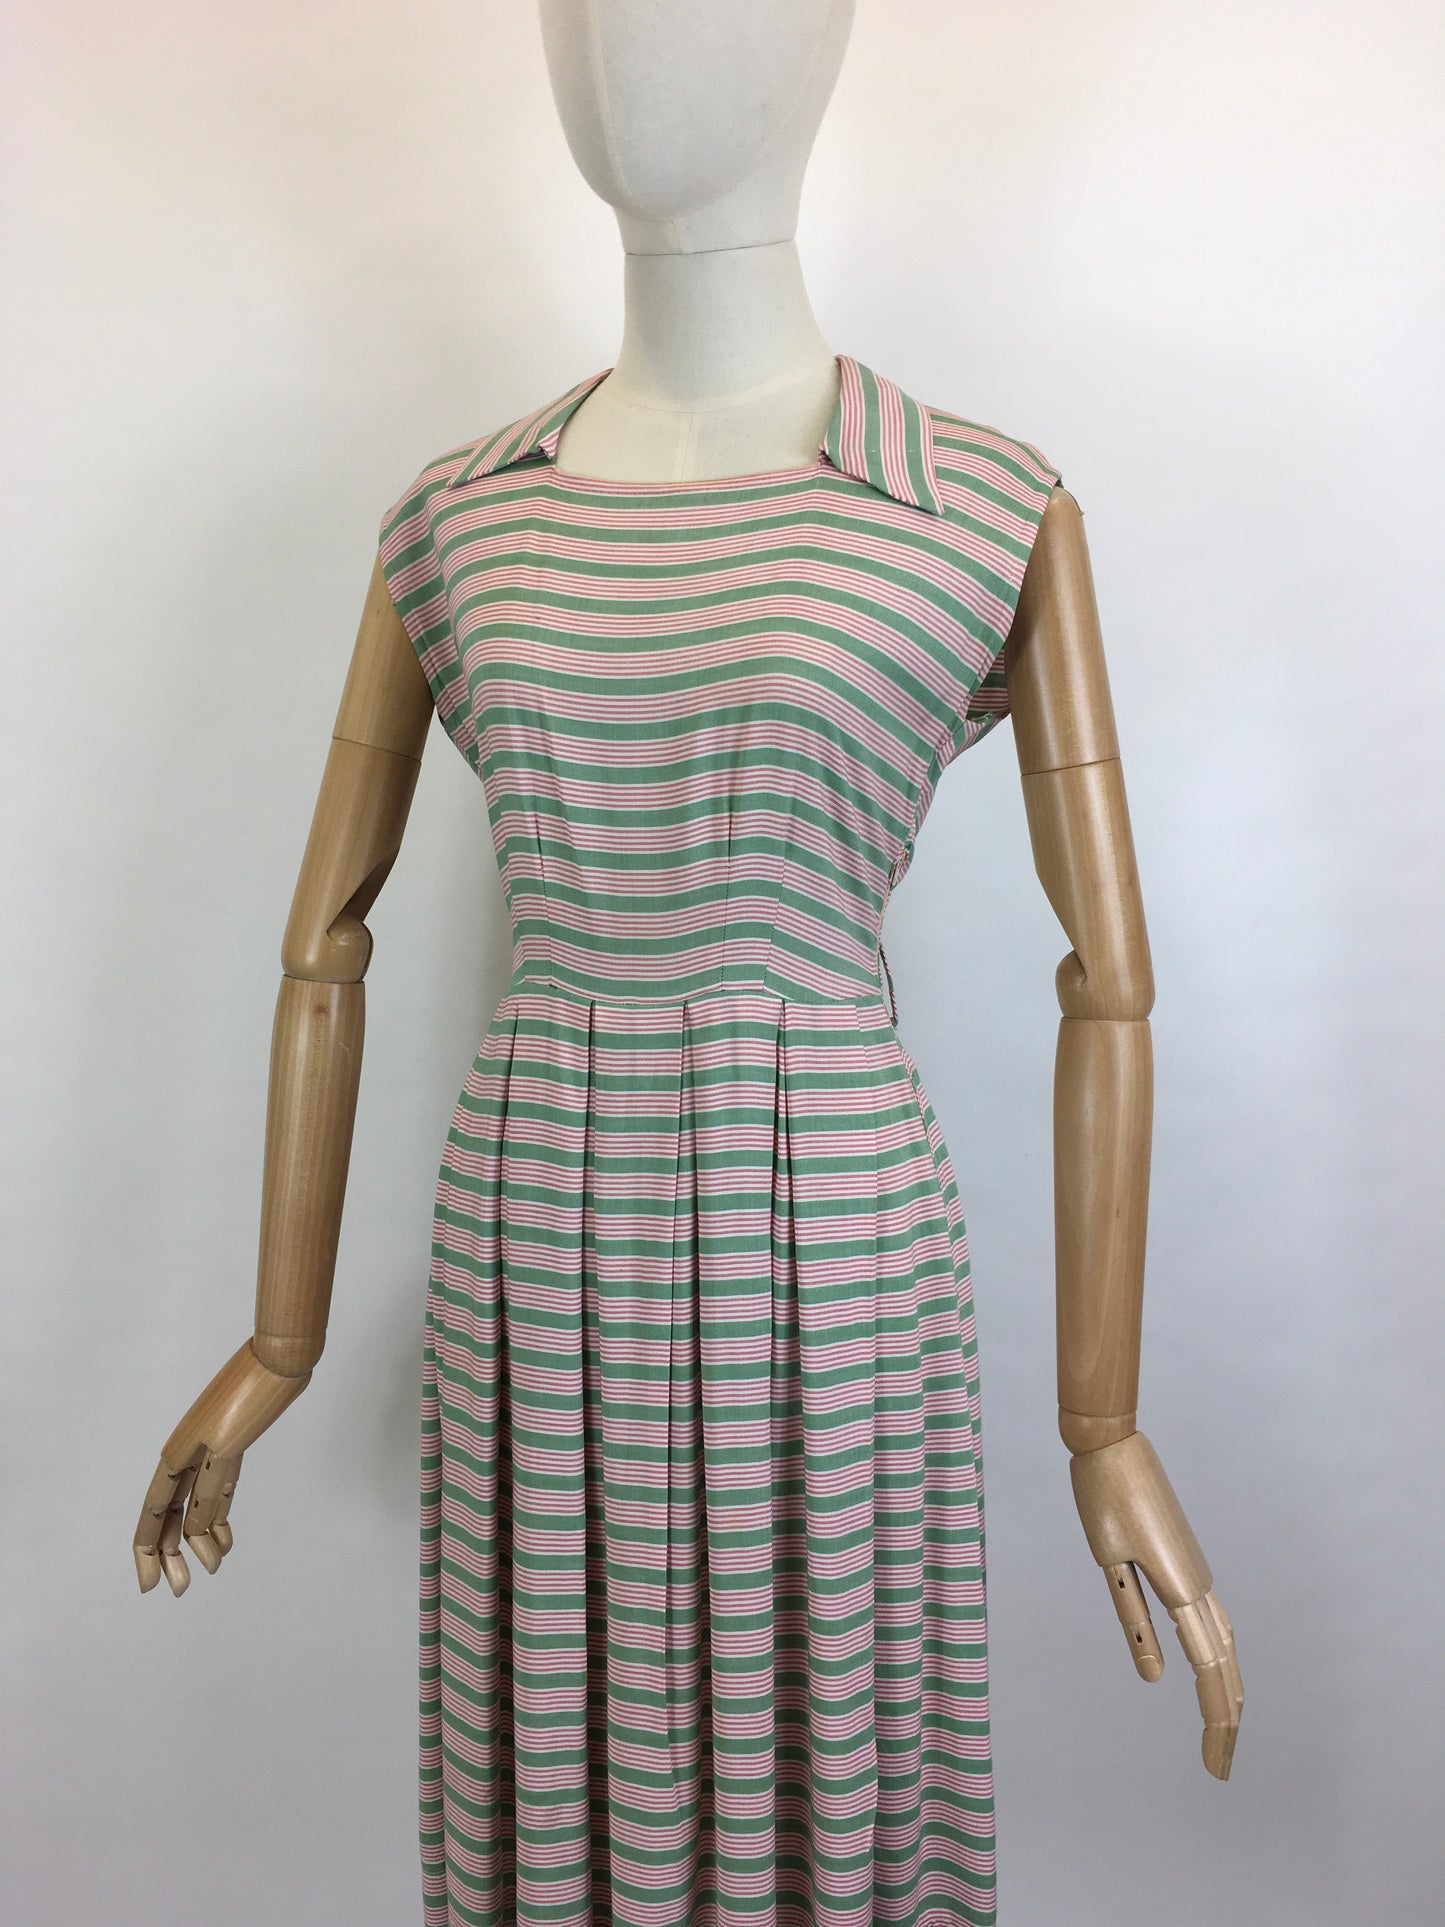 Original Late 1940’s Early 1950’s Cute Cotton Day Dress - In A Soft Cotton Stripe in Sage Green & Powdered Rose